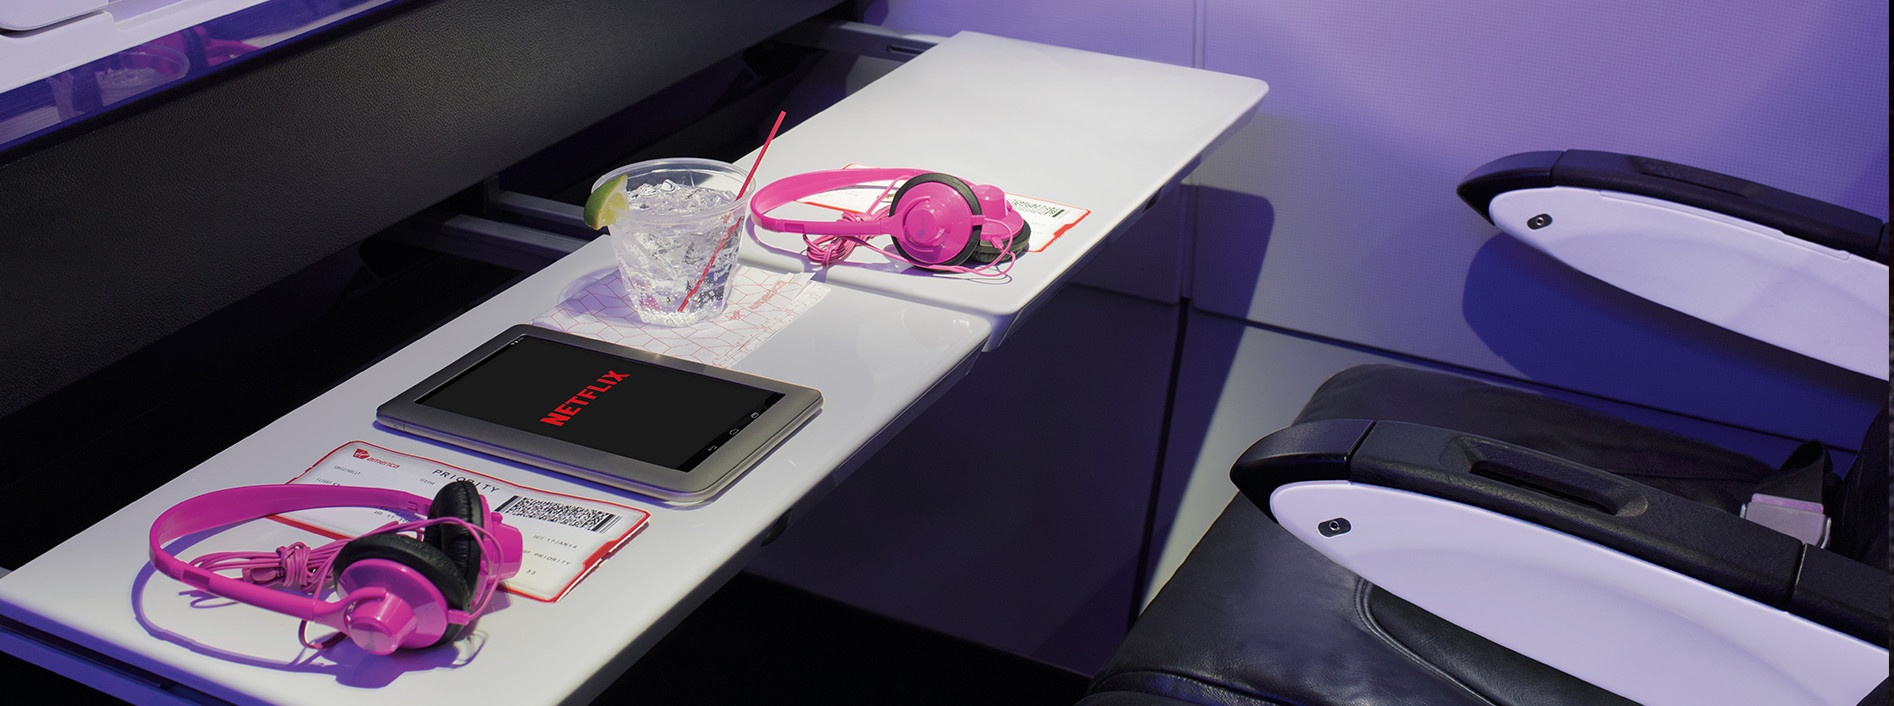 Virgin America Airlines and Netflix partner to offer 'next generation entertainment' on board 10 VA Airbus A320 Aircrafts. As part of their in-flight entertainment, flyers can access high-speed WiFi, and have unlimited access to the entire Netflix catalogue through their personal devices. - Netflix on board Virgin America